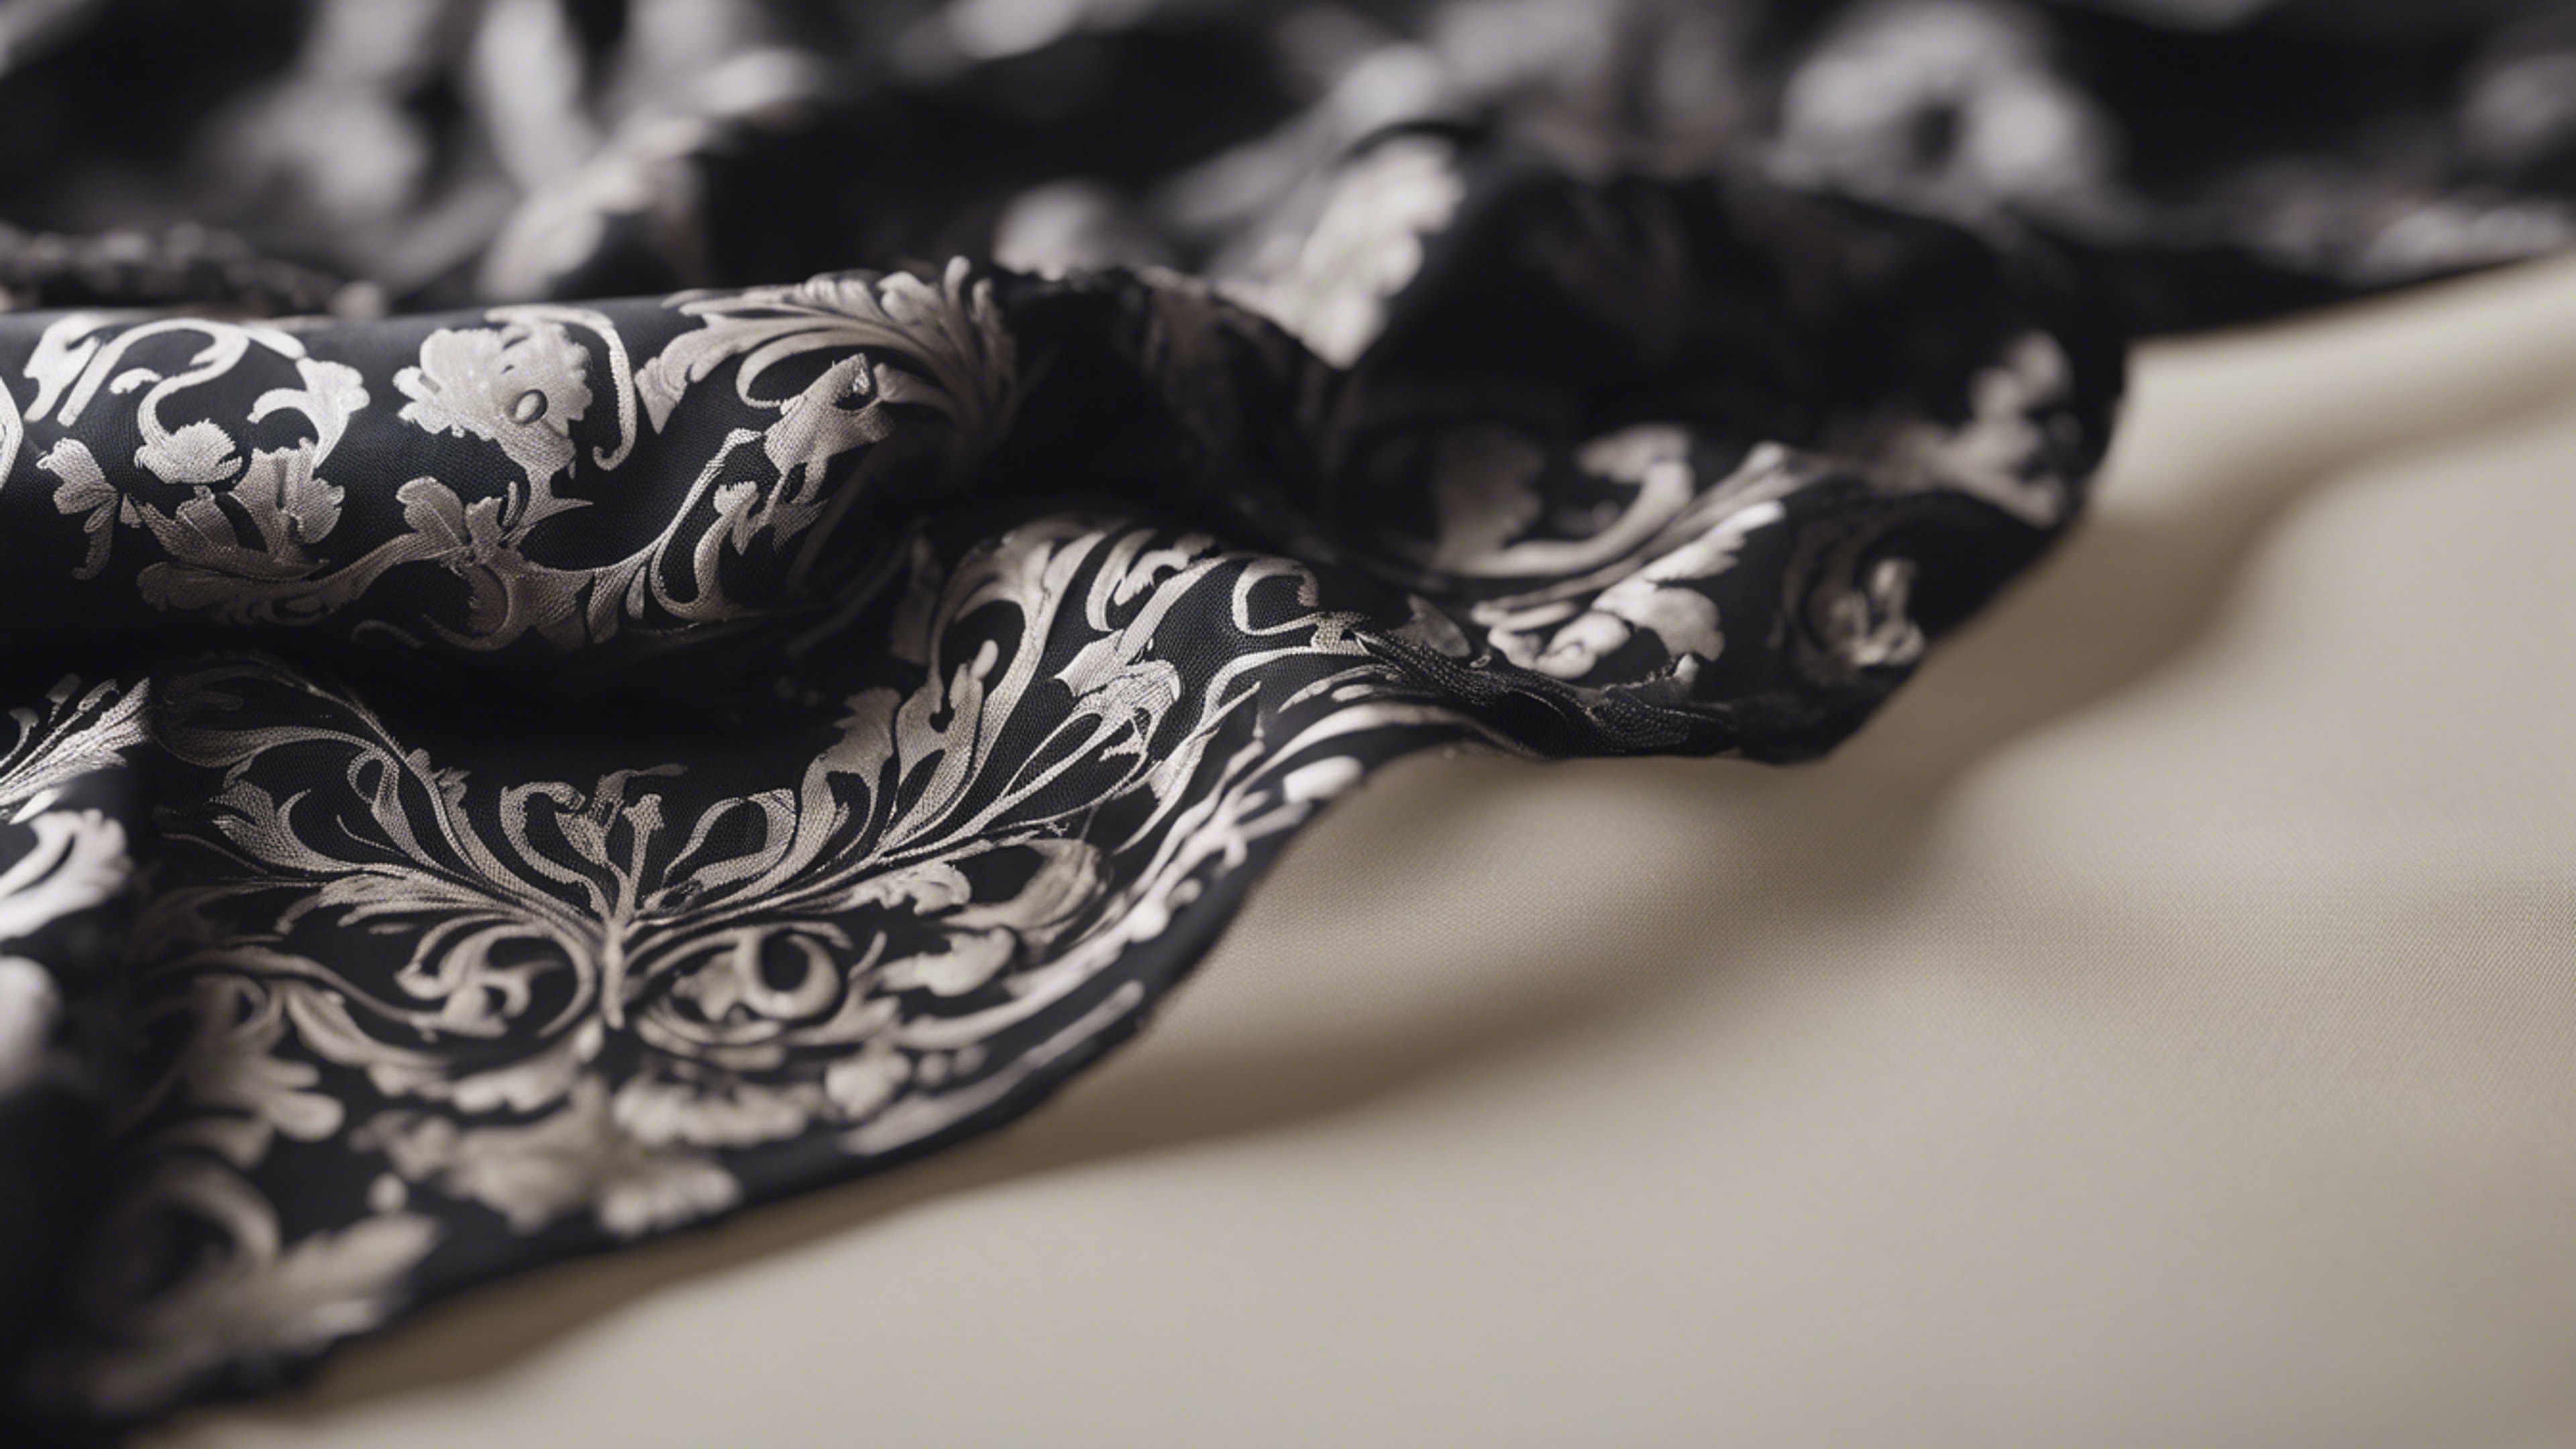 A piece of black damask fabric flowing in the wind on a neutral background. Tapeta[14b62583c63644549a6a]